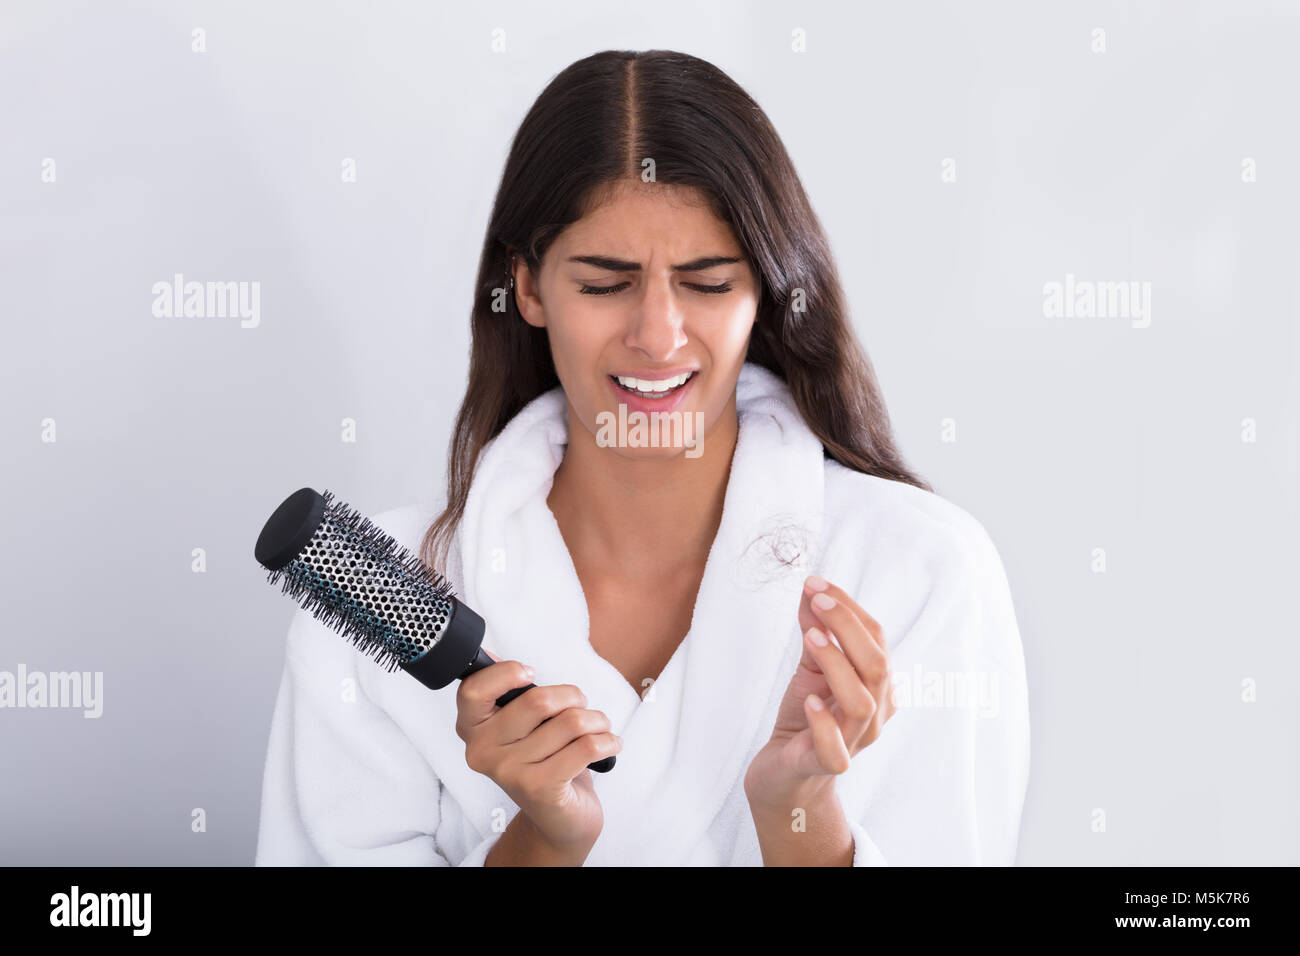 Shocked Young Woman In Bathrobe Holding Comb While Looking At Hair Loss At Home Stock Photo